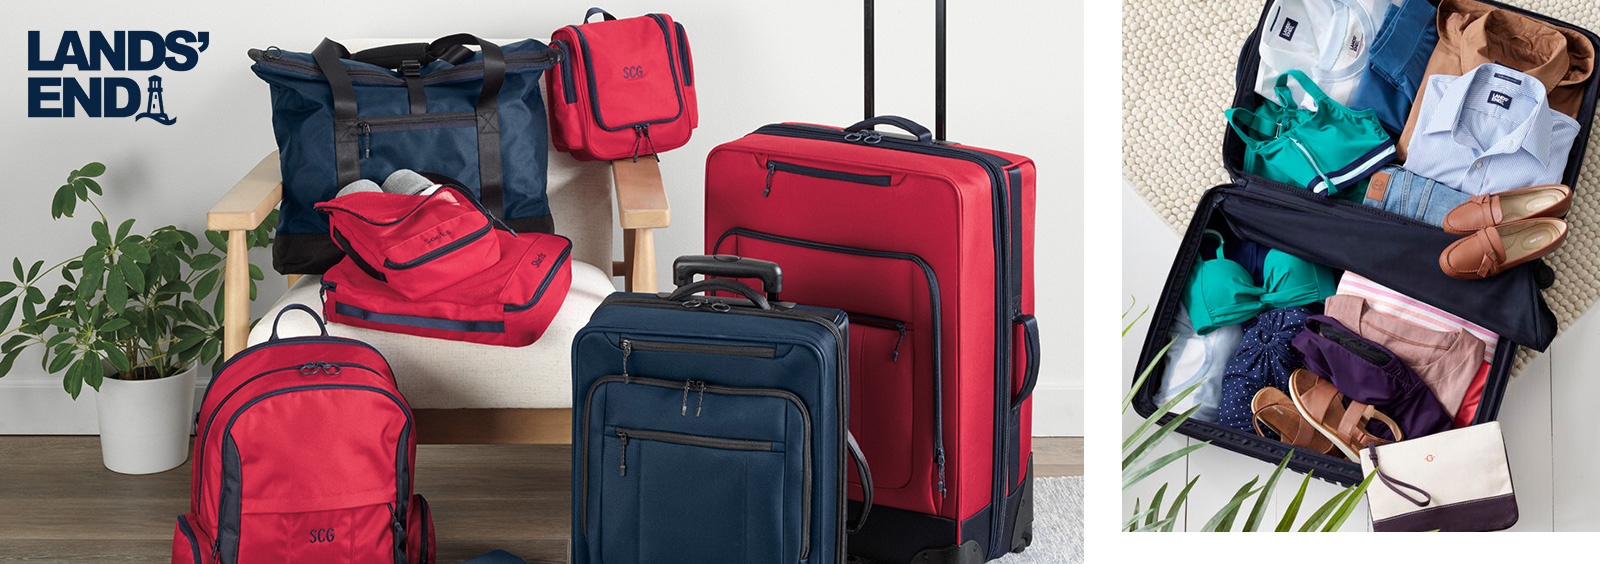 How to Pack for Vacation Airport Travel